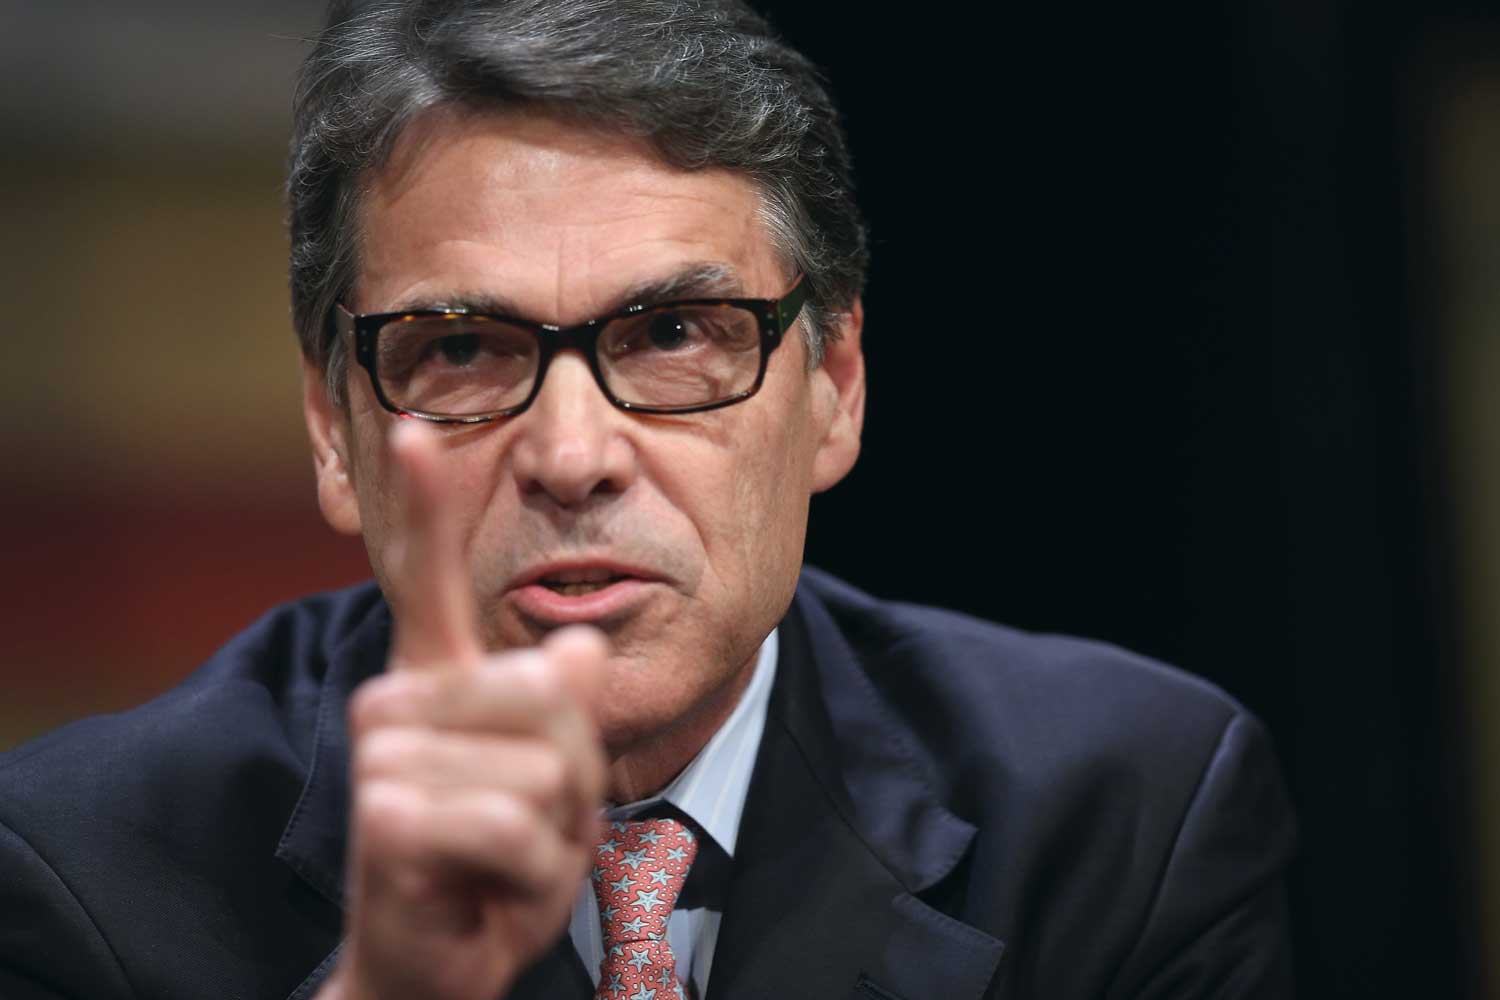 Republican presidential candidate and former Texas Governor Rick Perry fields questions at The Family Leadership Summit at Stephens Auditorium on July 18, 2015 in Ames, Iowa. According to the organizers the purpose of The Family Leadership Summit is to inspire, motivate, and educate conservatives
